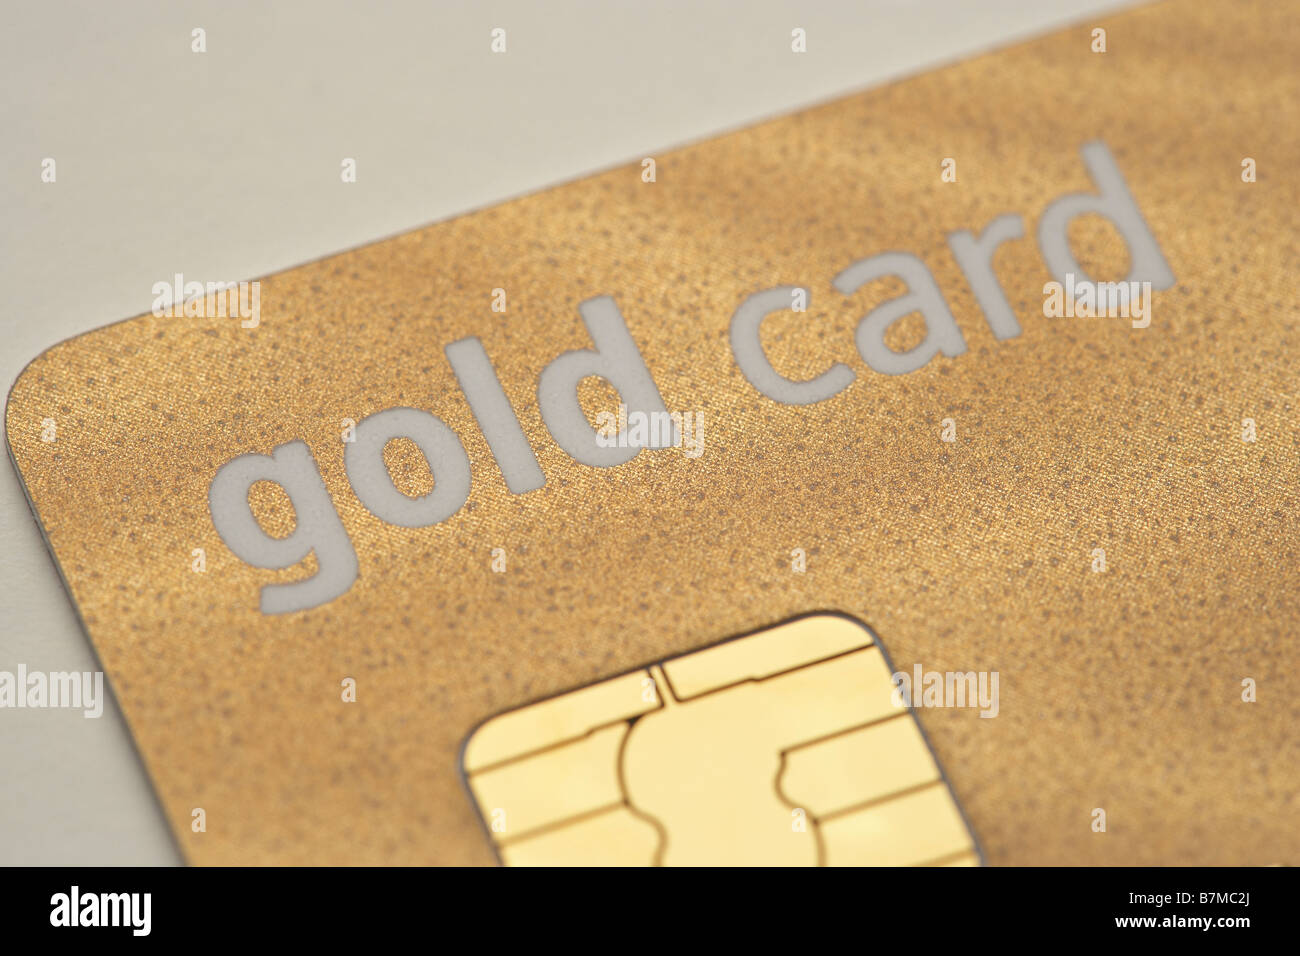 Gold credit card Stock Photo